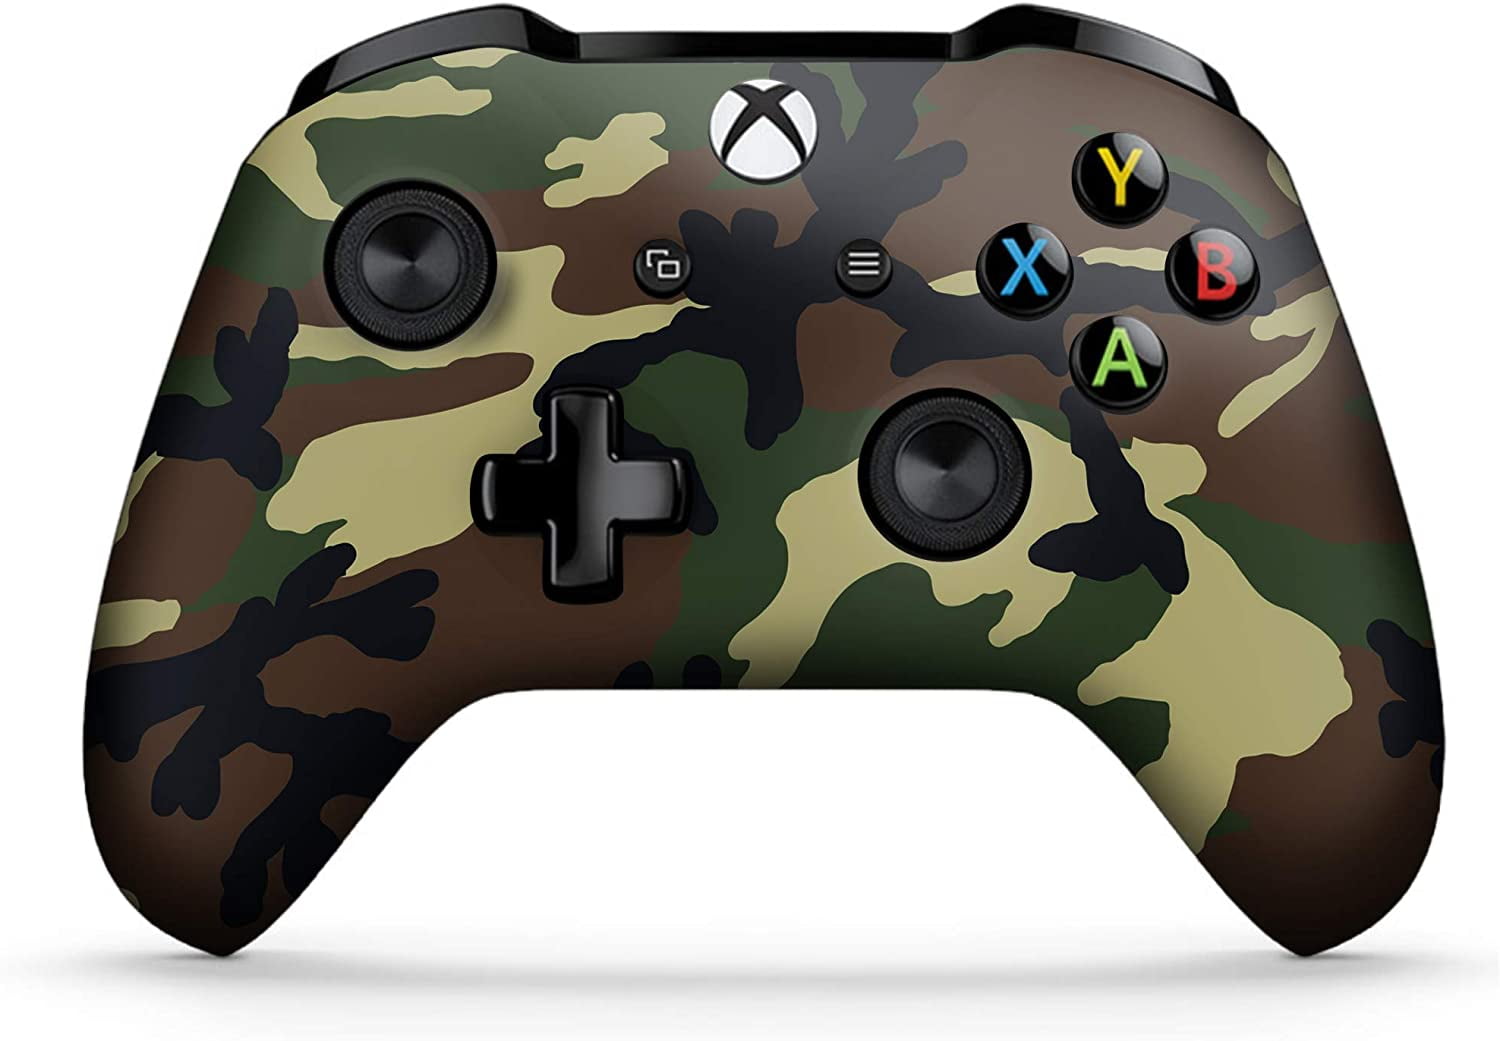 DreamController Modded Xbox One Controller - Xbox One Modded Controller  Works with Xbox One S / Xbox One X / and Windows 10 PC - Rapid Fire and  Aimbot Xbox One Controller 